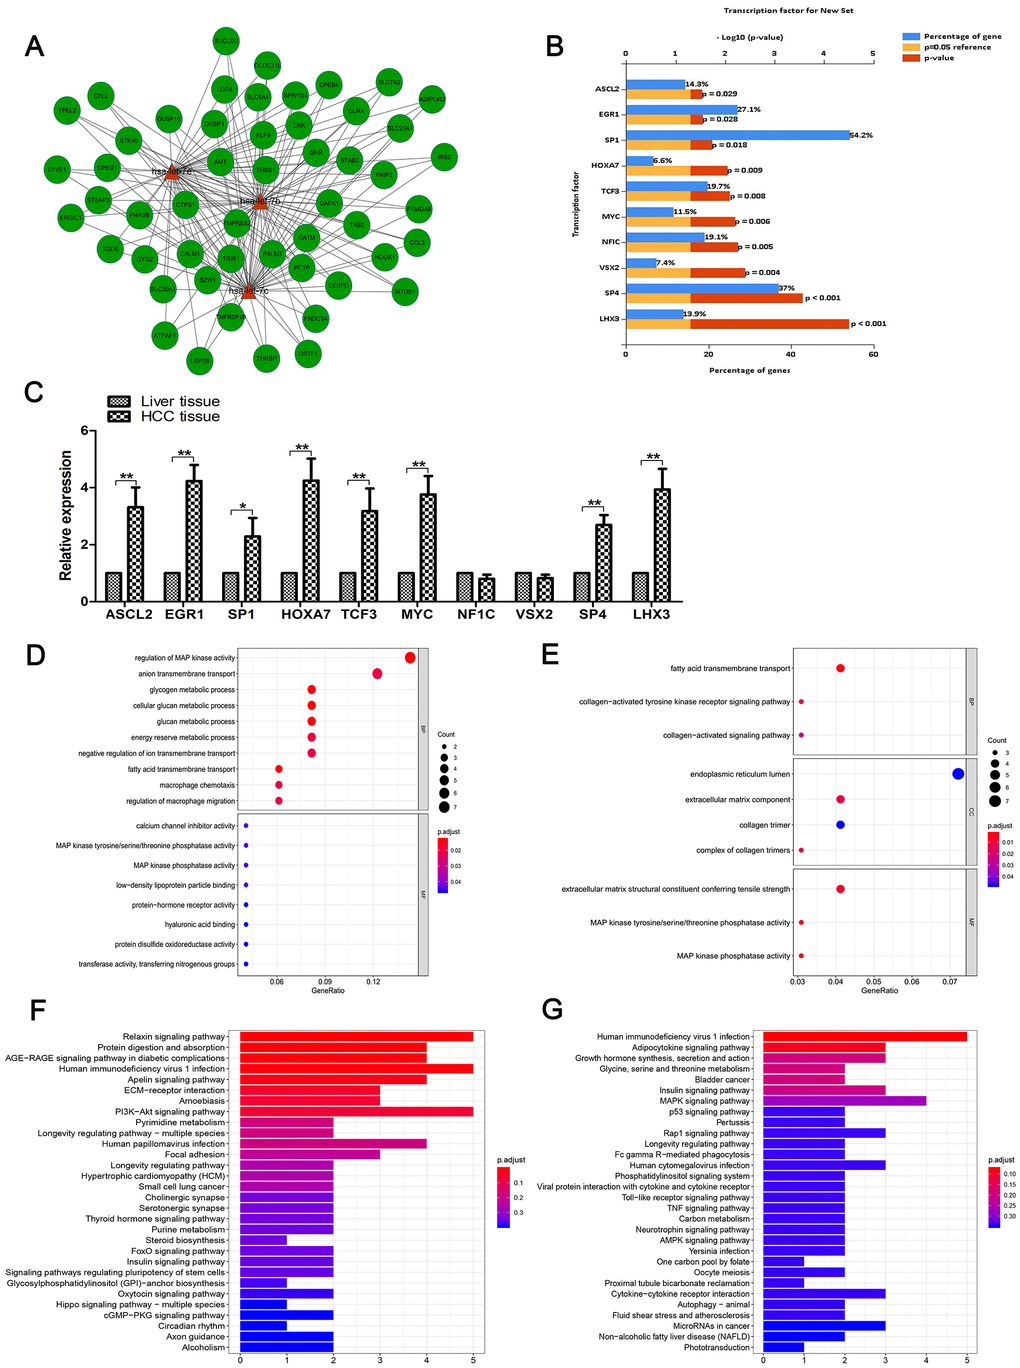 Functional enrichment analysis. (A) The network of cross-linked genes of let-7b, let-7c and let-7e was constructed of these three miRNAs and 52 genes. (B) Top 10 relevant enriched TFs of let-7b, let-7c and let-7e were analyzed, including ASCL2, EGR1, SP1, HOXA7, TCF3, MYC, NF1C, VSX2, SP4 and LHX3. (C) Expression of the aforementioned 10 TFs in HCC tissues and matched normal tissues as shown by RT-qPCR. (D) GO analysis of genes negatively correlated with the three miRNAs. (E) GO analysis of genes positively correlated with these miRNAs. (F) KEGG pathway enrichment analysis was conducted to identify the potential pathways of genes positively correlated with the miRNAs. (G) KEGG pathway enrichment analysis of genes negatively correlated with the miRNAs.